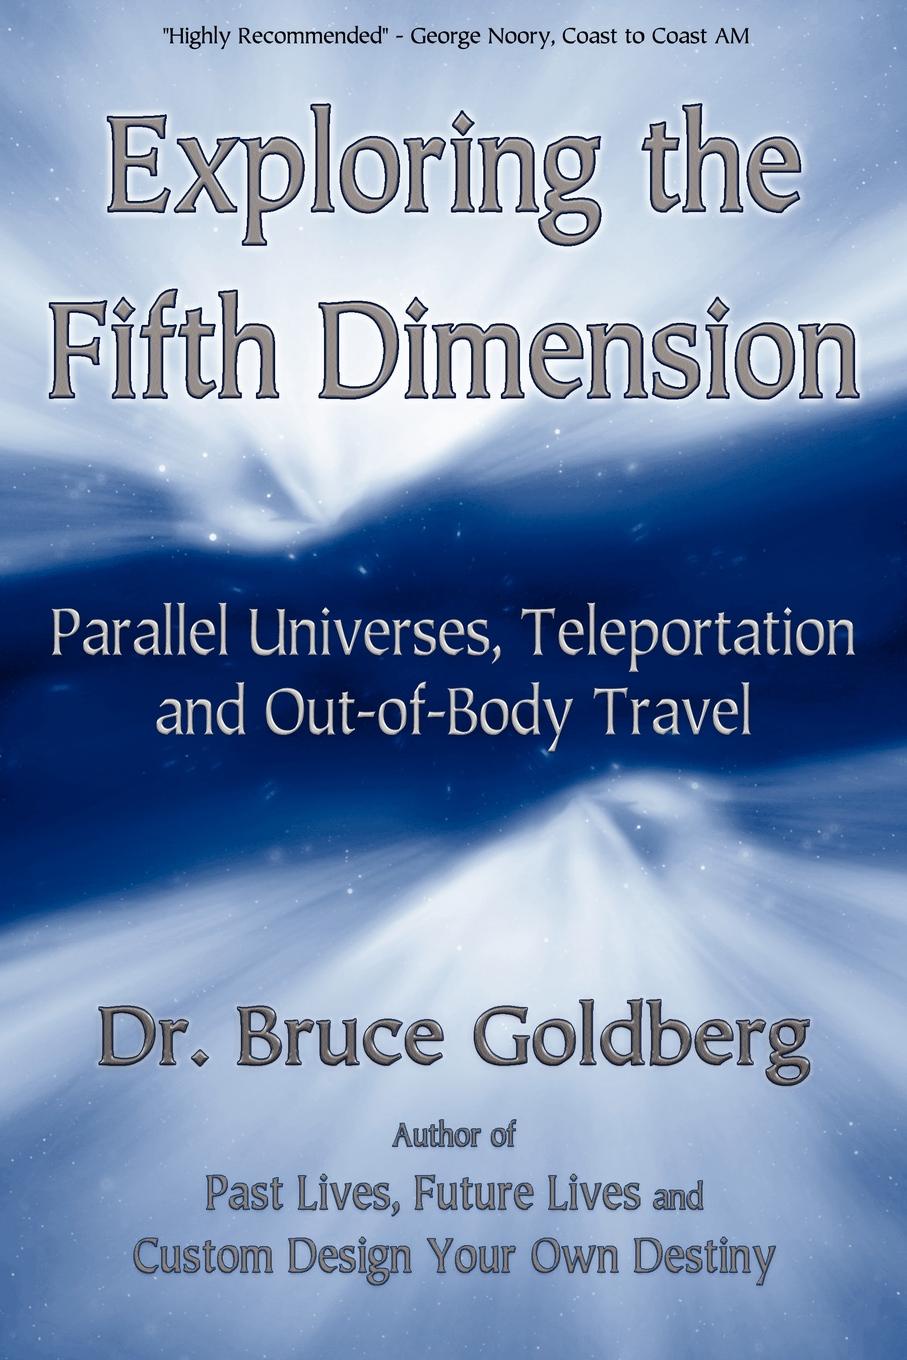 Bruce Goldberg Exploring the Fifth Dimension. Parallel Universes, Teleportation and Out-of-Body Travel